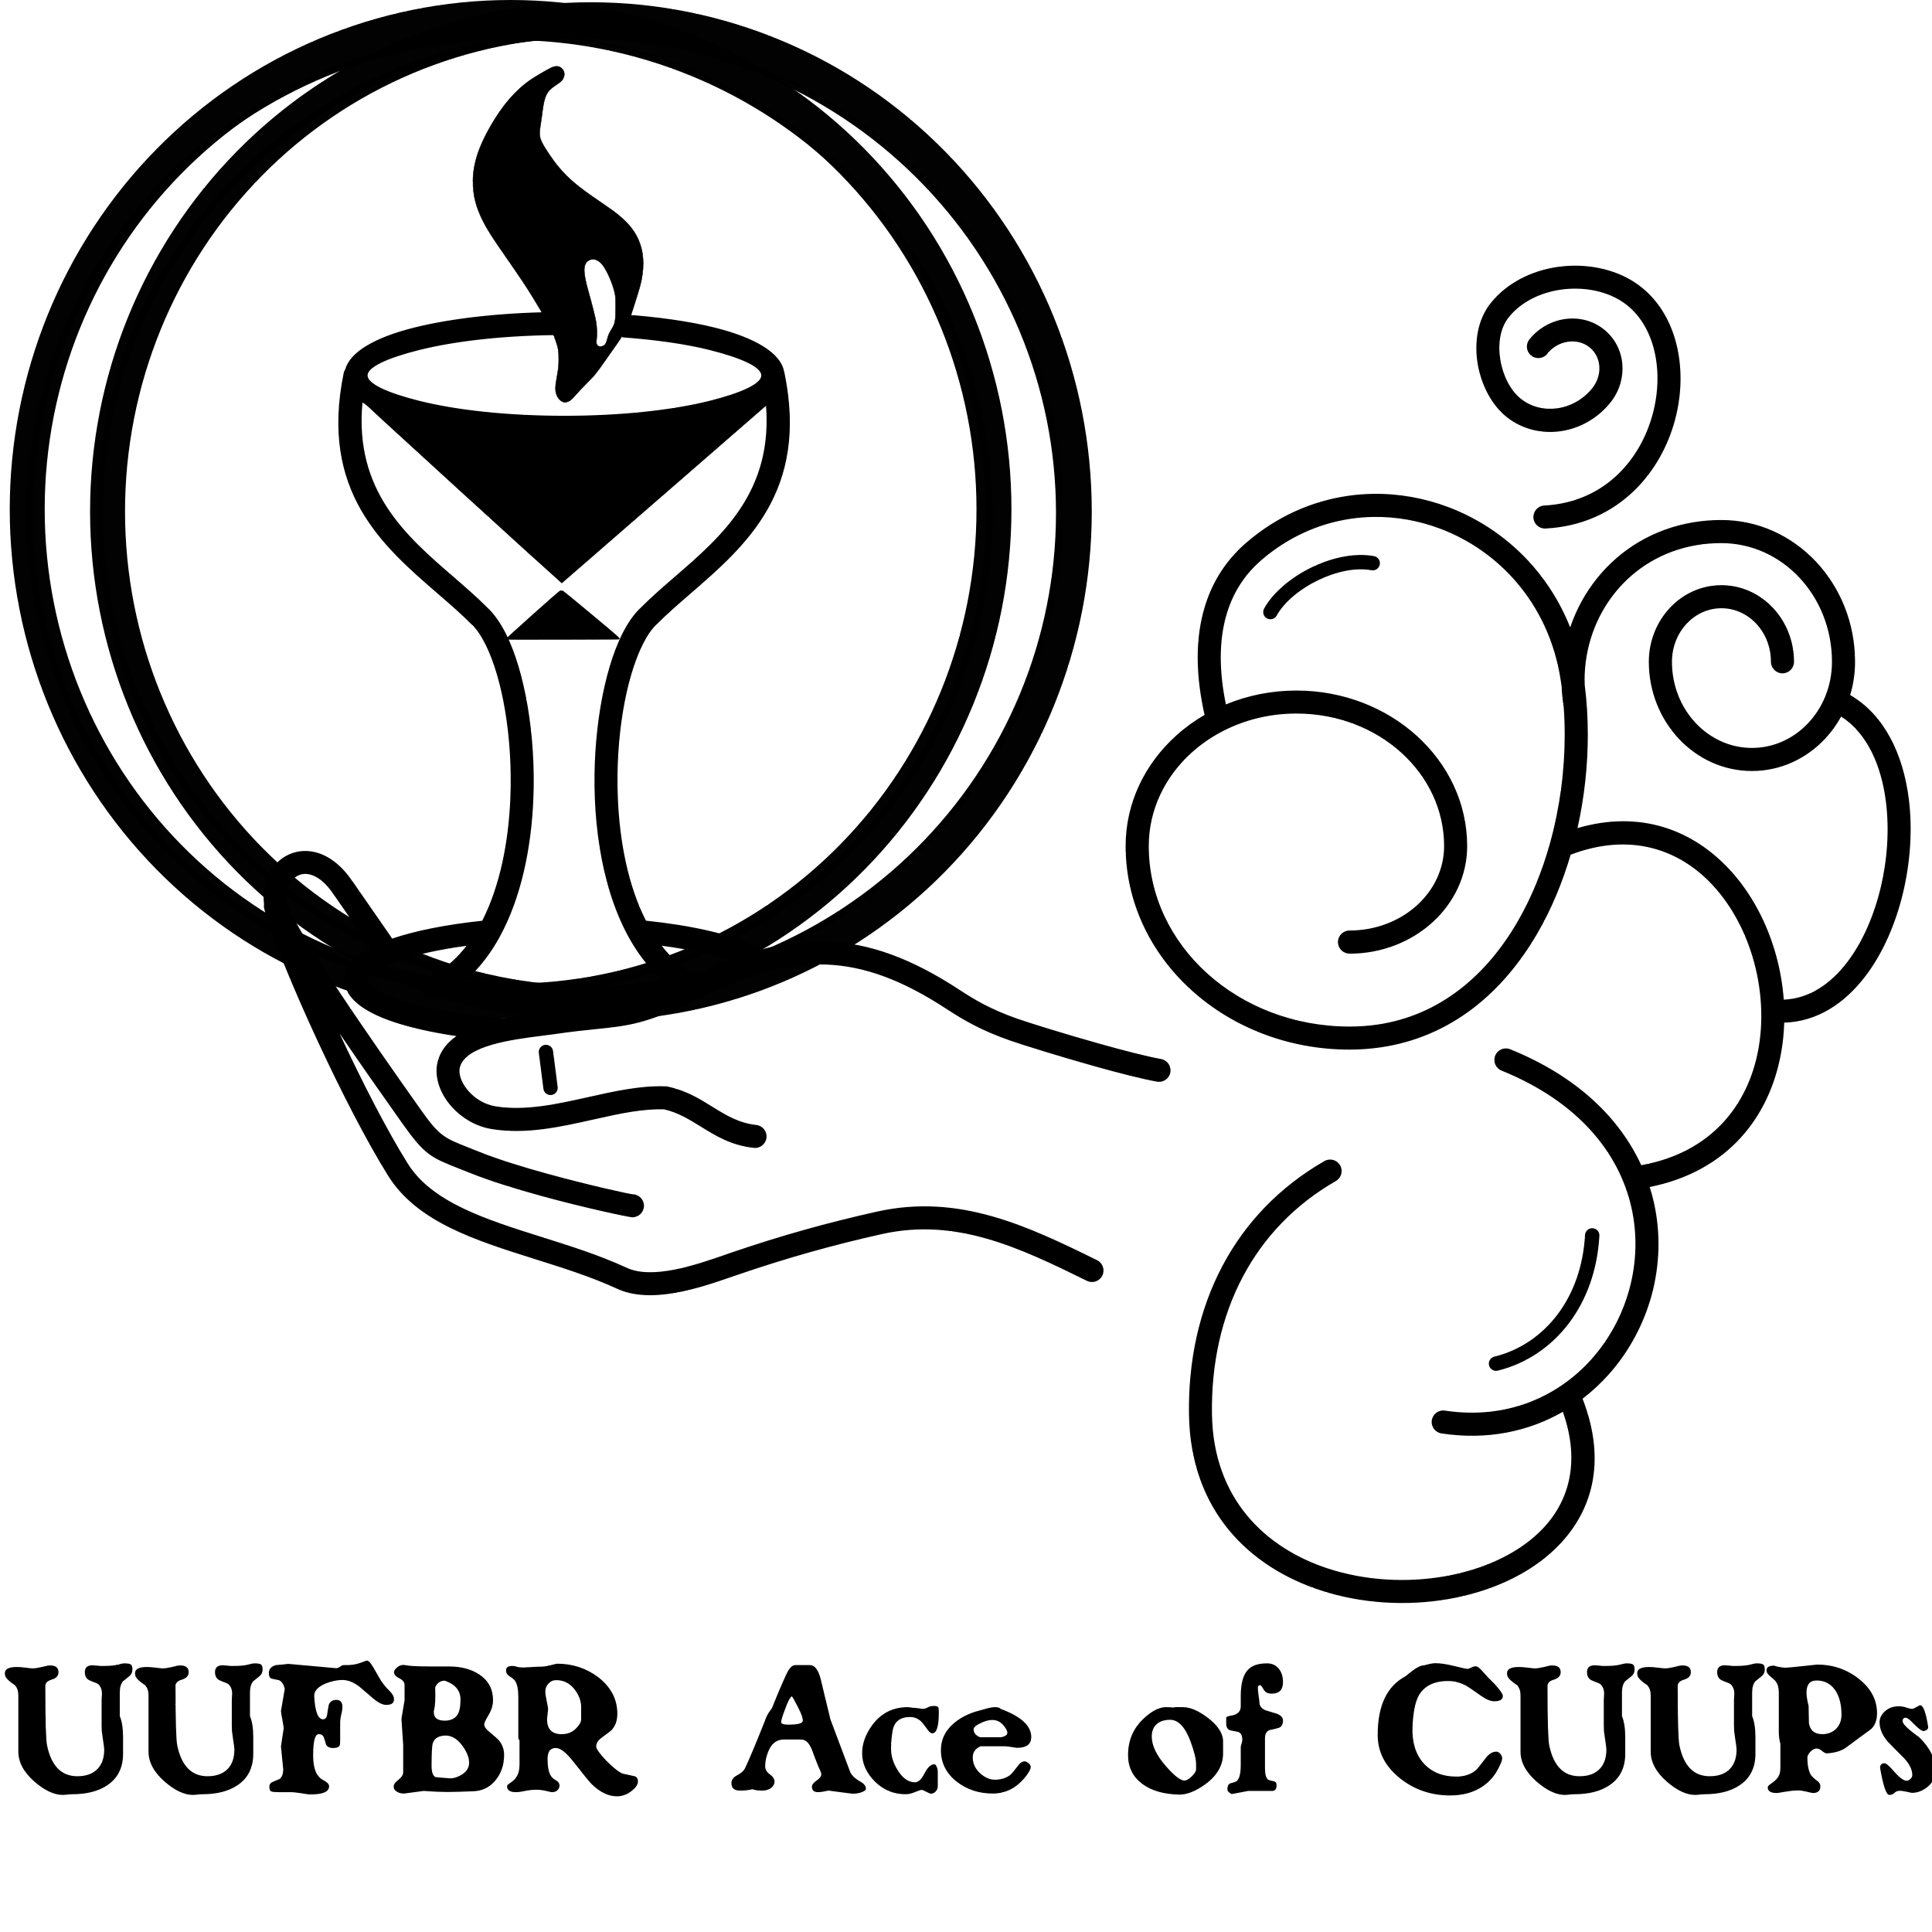 The Ace of Cups tarot card, reimagined with the UUFBR chalice and double hoops